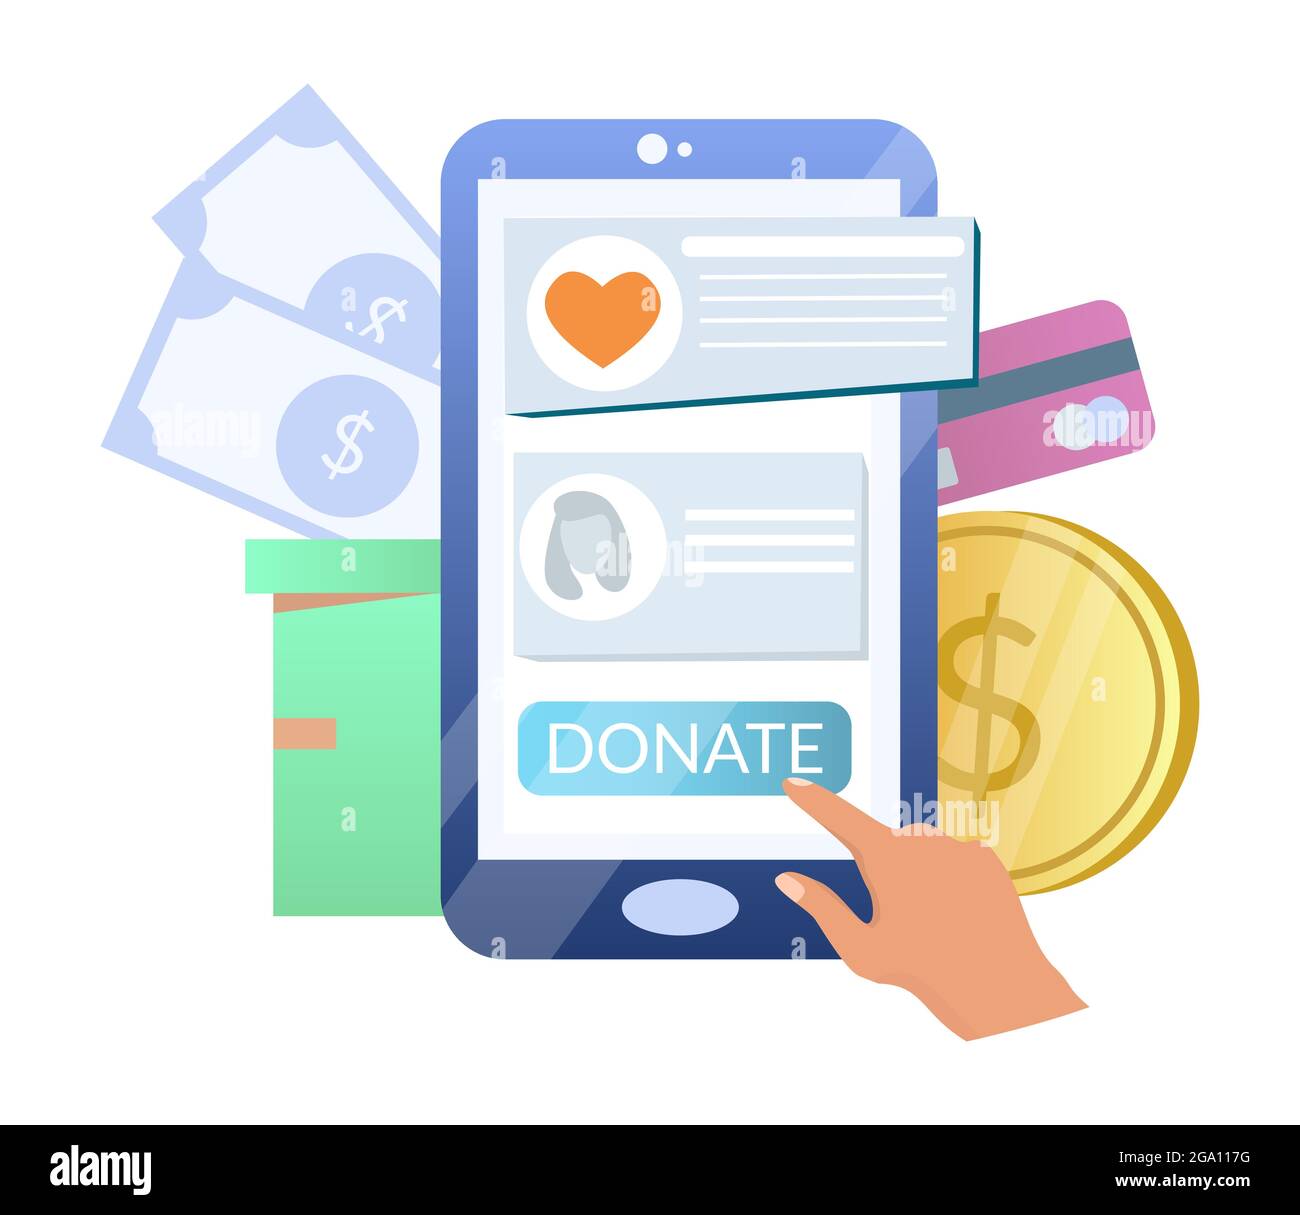 Online donation. Hand donating money using smartphone, vector illustration. Charity moble phone app. Stock Vector